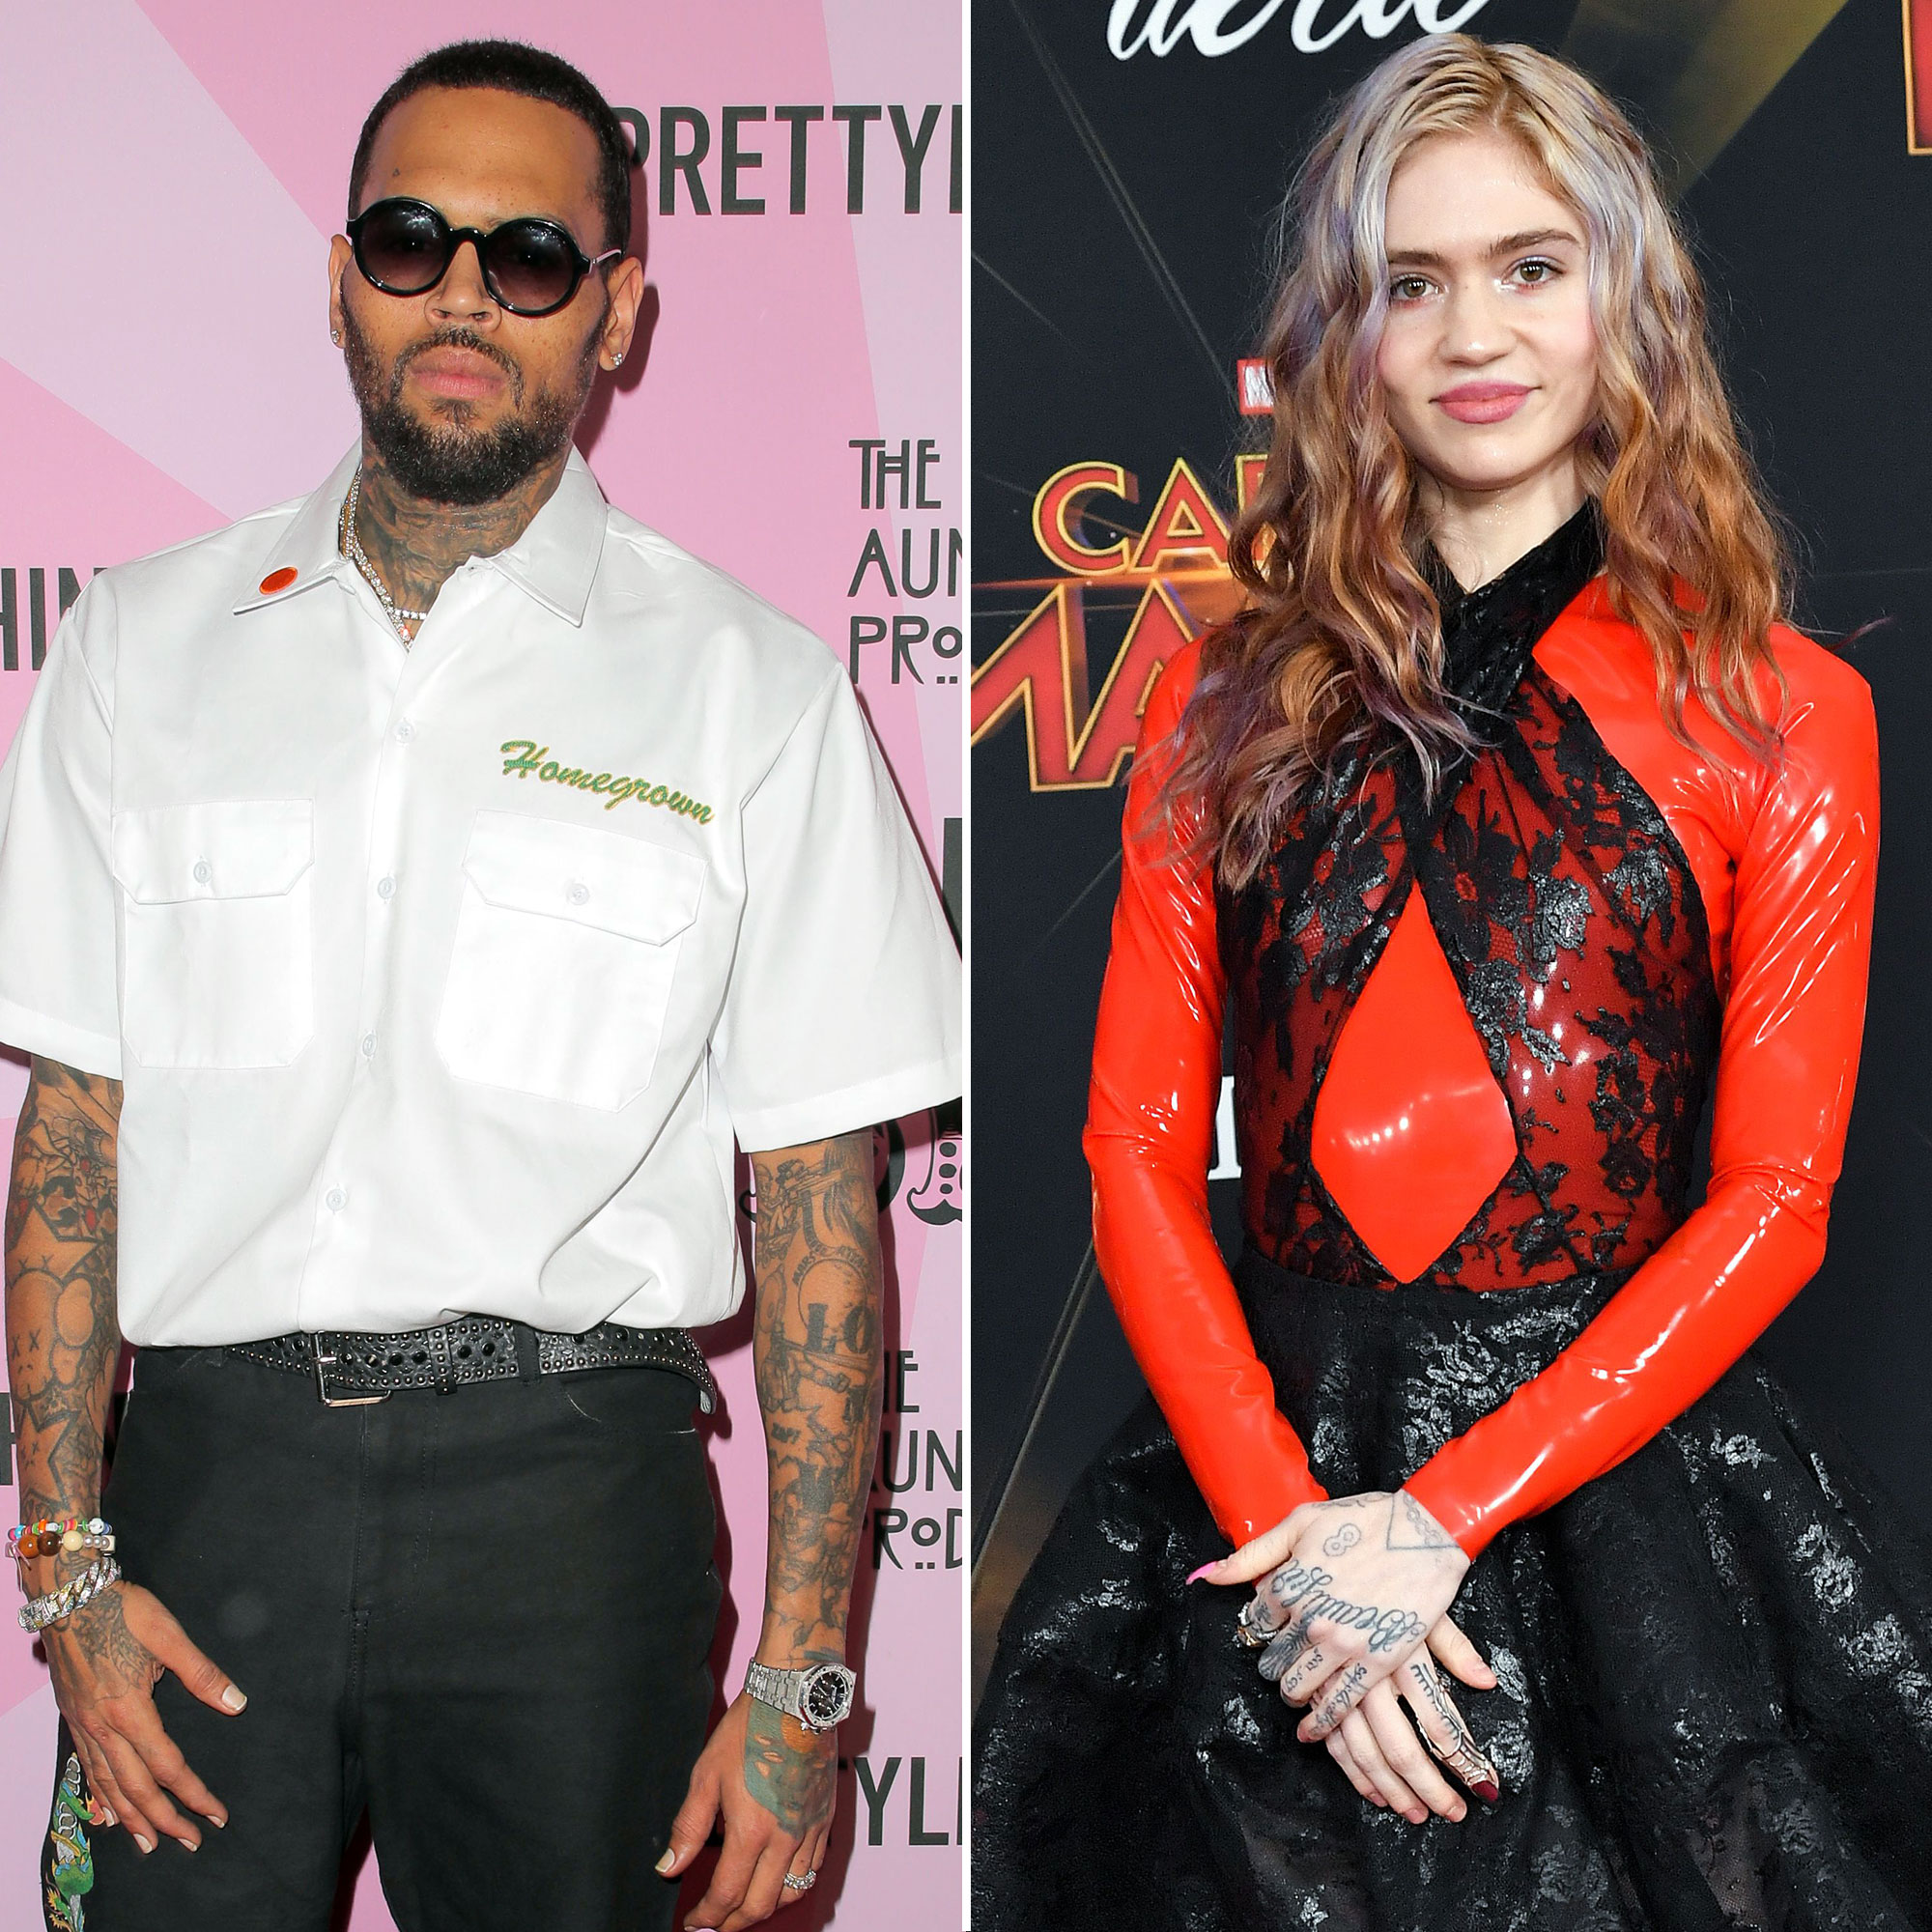 See Celebs' Wildest and Craziest Tattoos of All Time: Chris Brown's Face  Ink to Grimes' Alien Design - Us Weekly